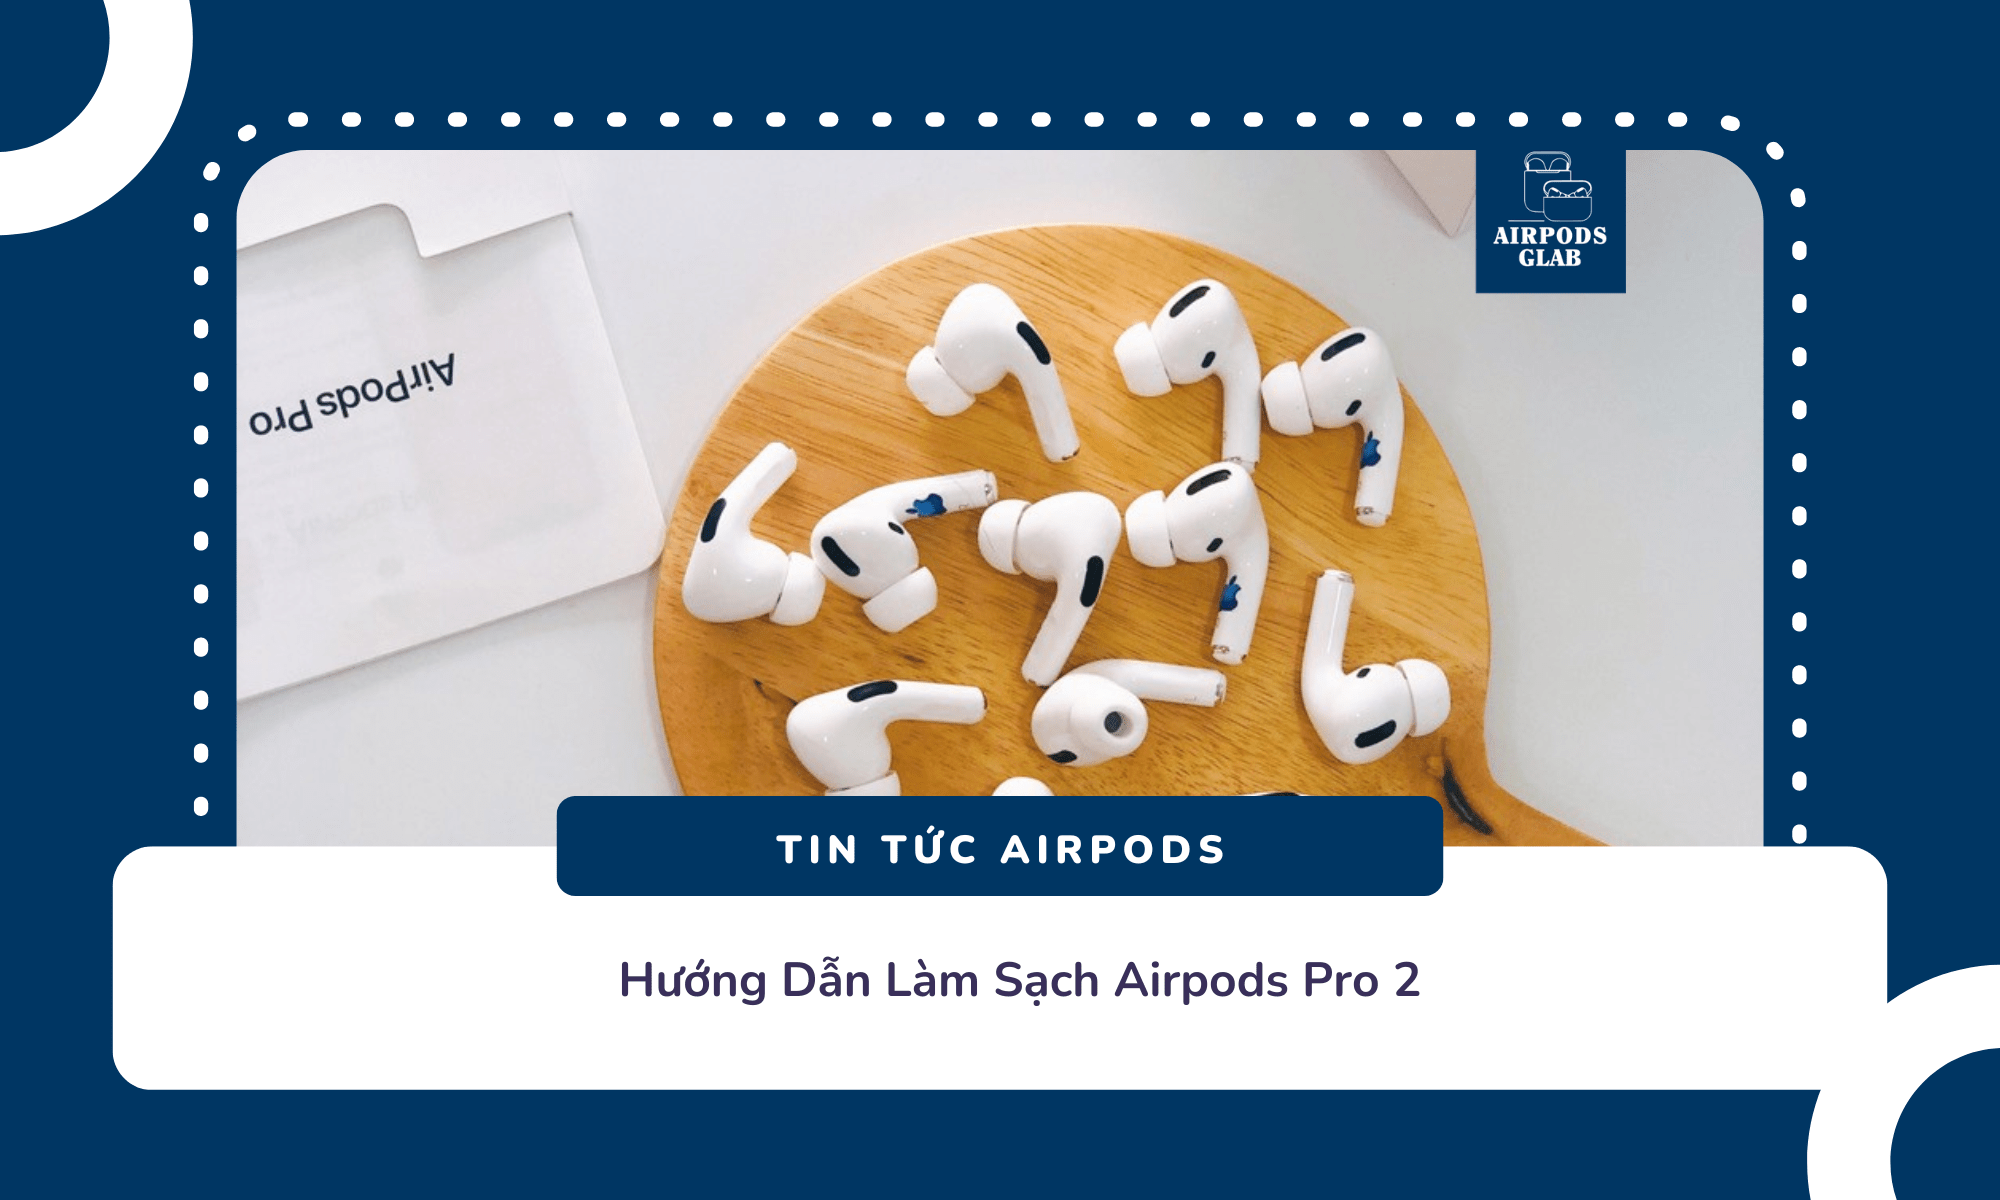 lam-sach-airpods-pro-2 